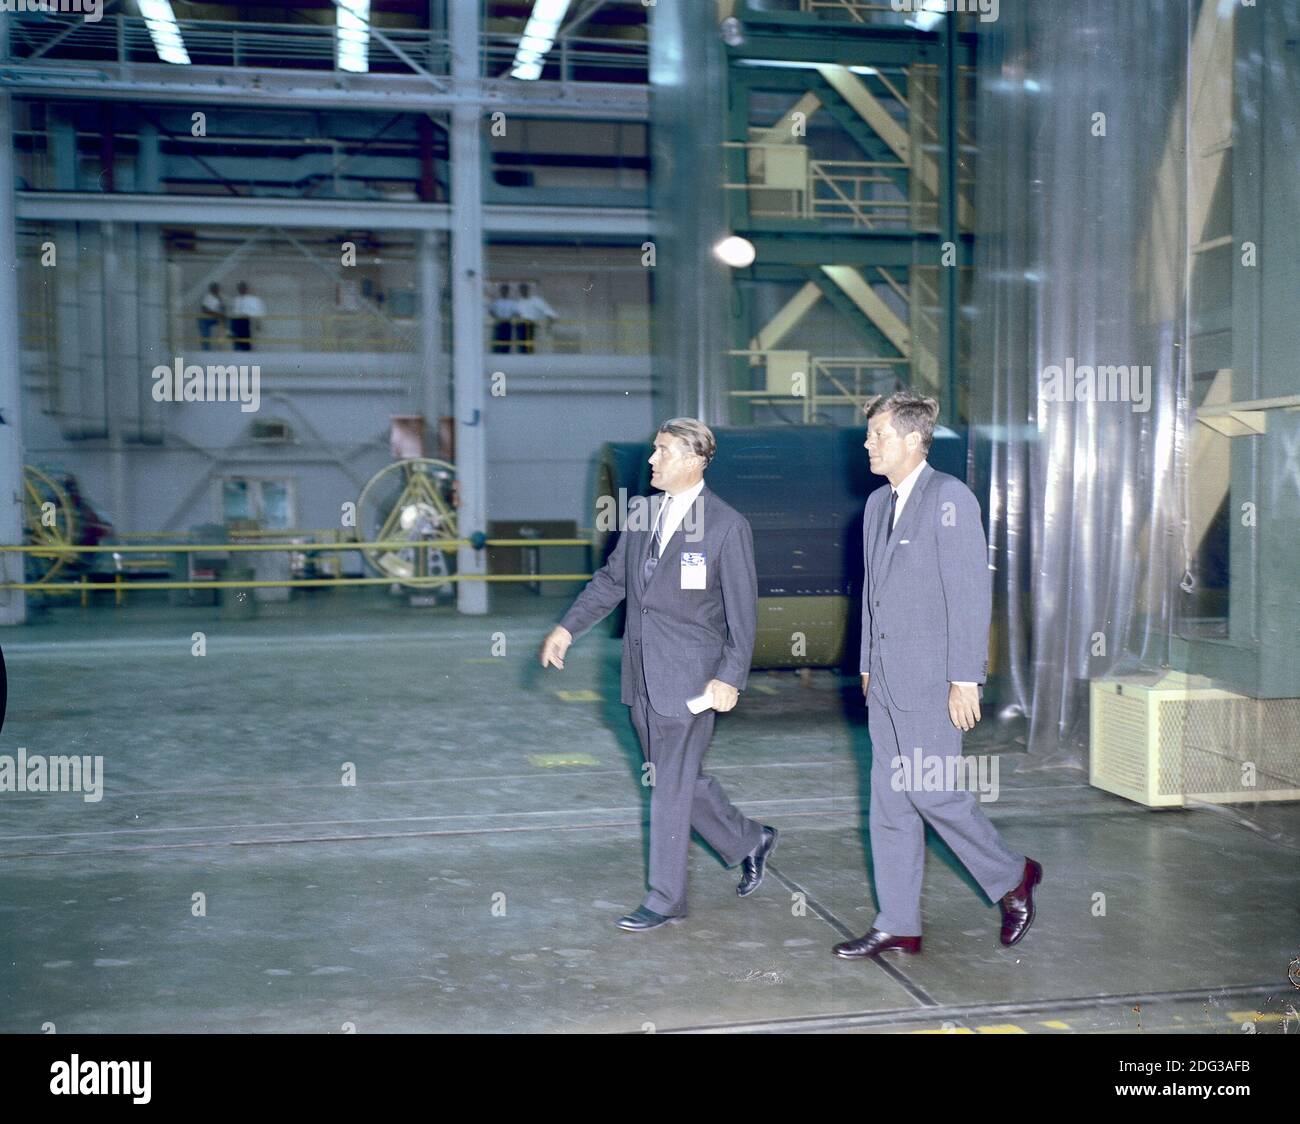 United States President John F. Kennedy visited Marshall Space Flight Center (MSFC) in Huntsville, Alabama, USA, on September 11, 1962. Here President Kennedy and Dr. Wernher von Braun, MSFC Director, tour one of the laboratories. Photo by NASA via CNP Stock Photo